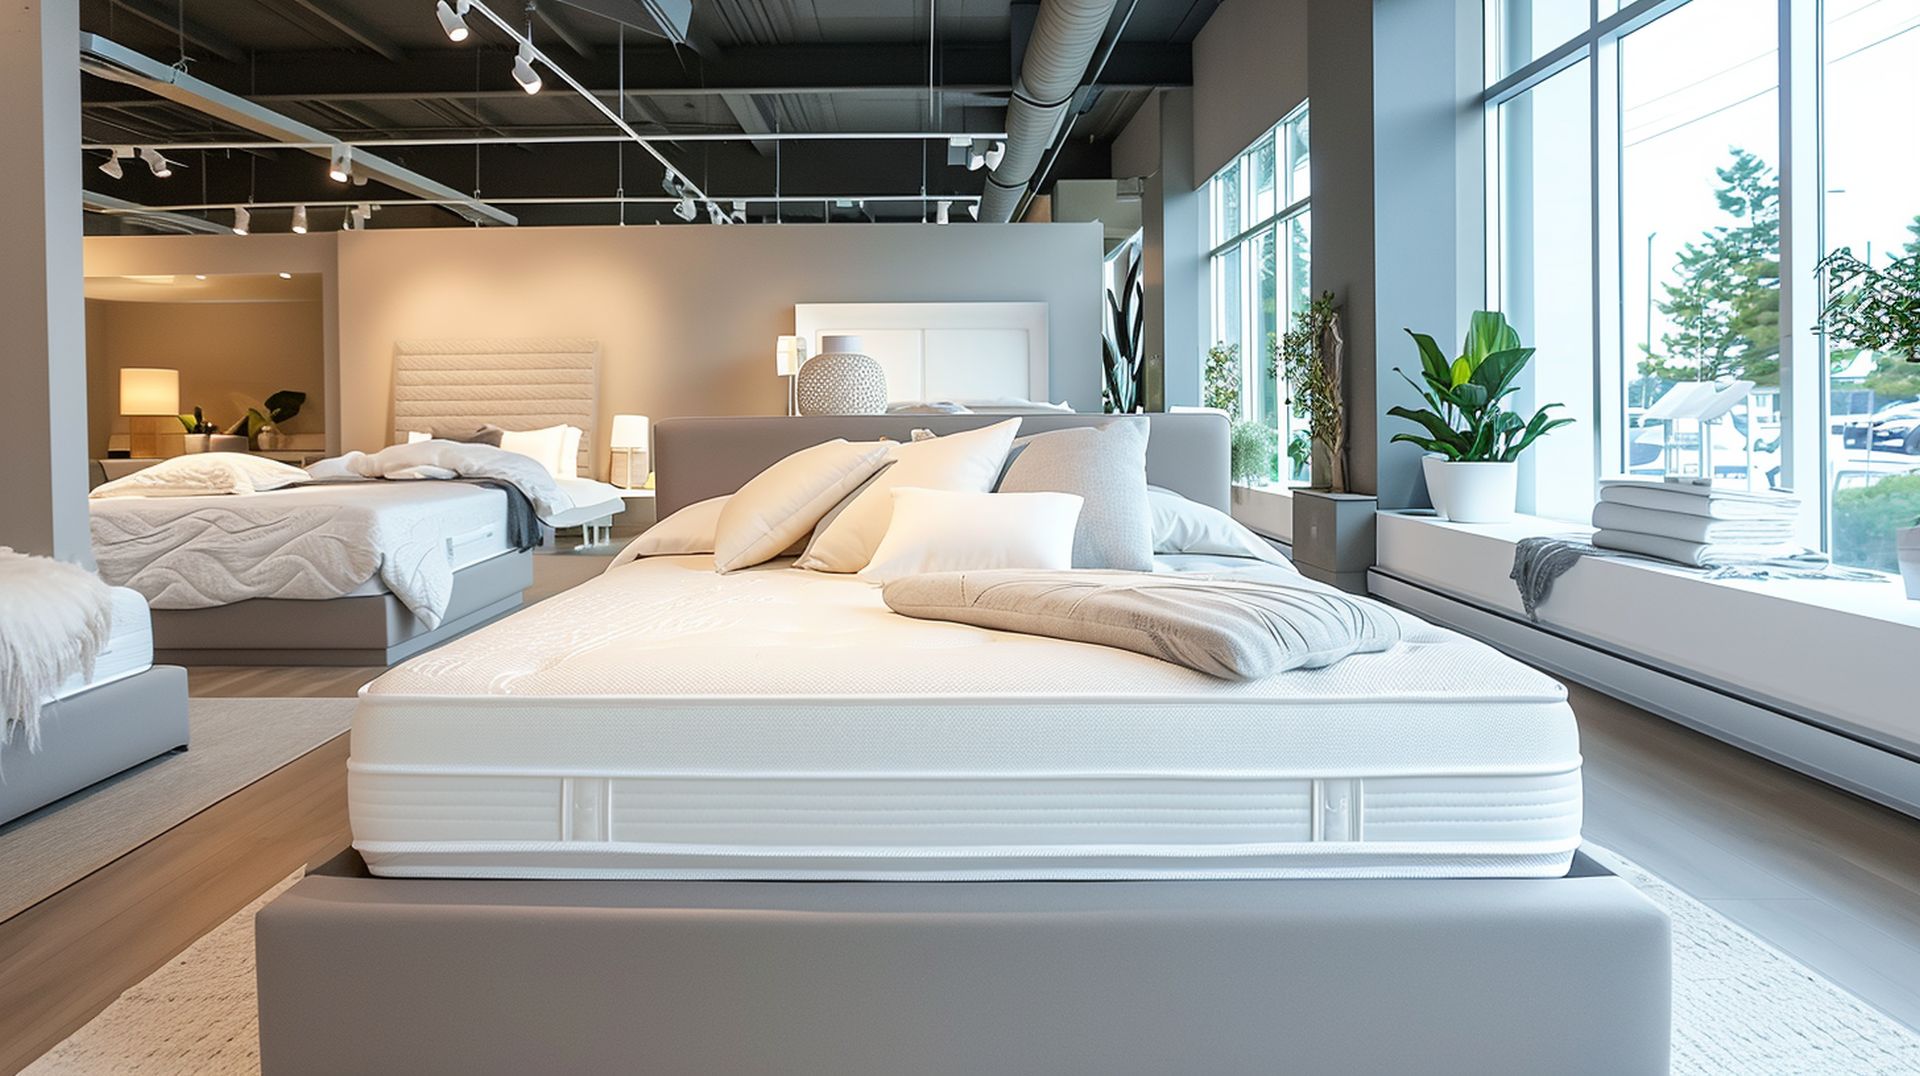 Local Battle Creek mattress stores have the best prices, sales, and deals if you're looking for a new mattress in Battle Creek